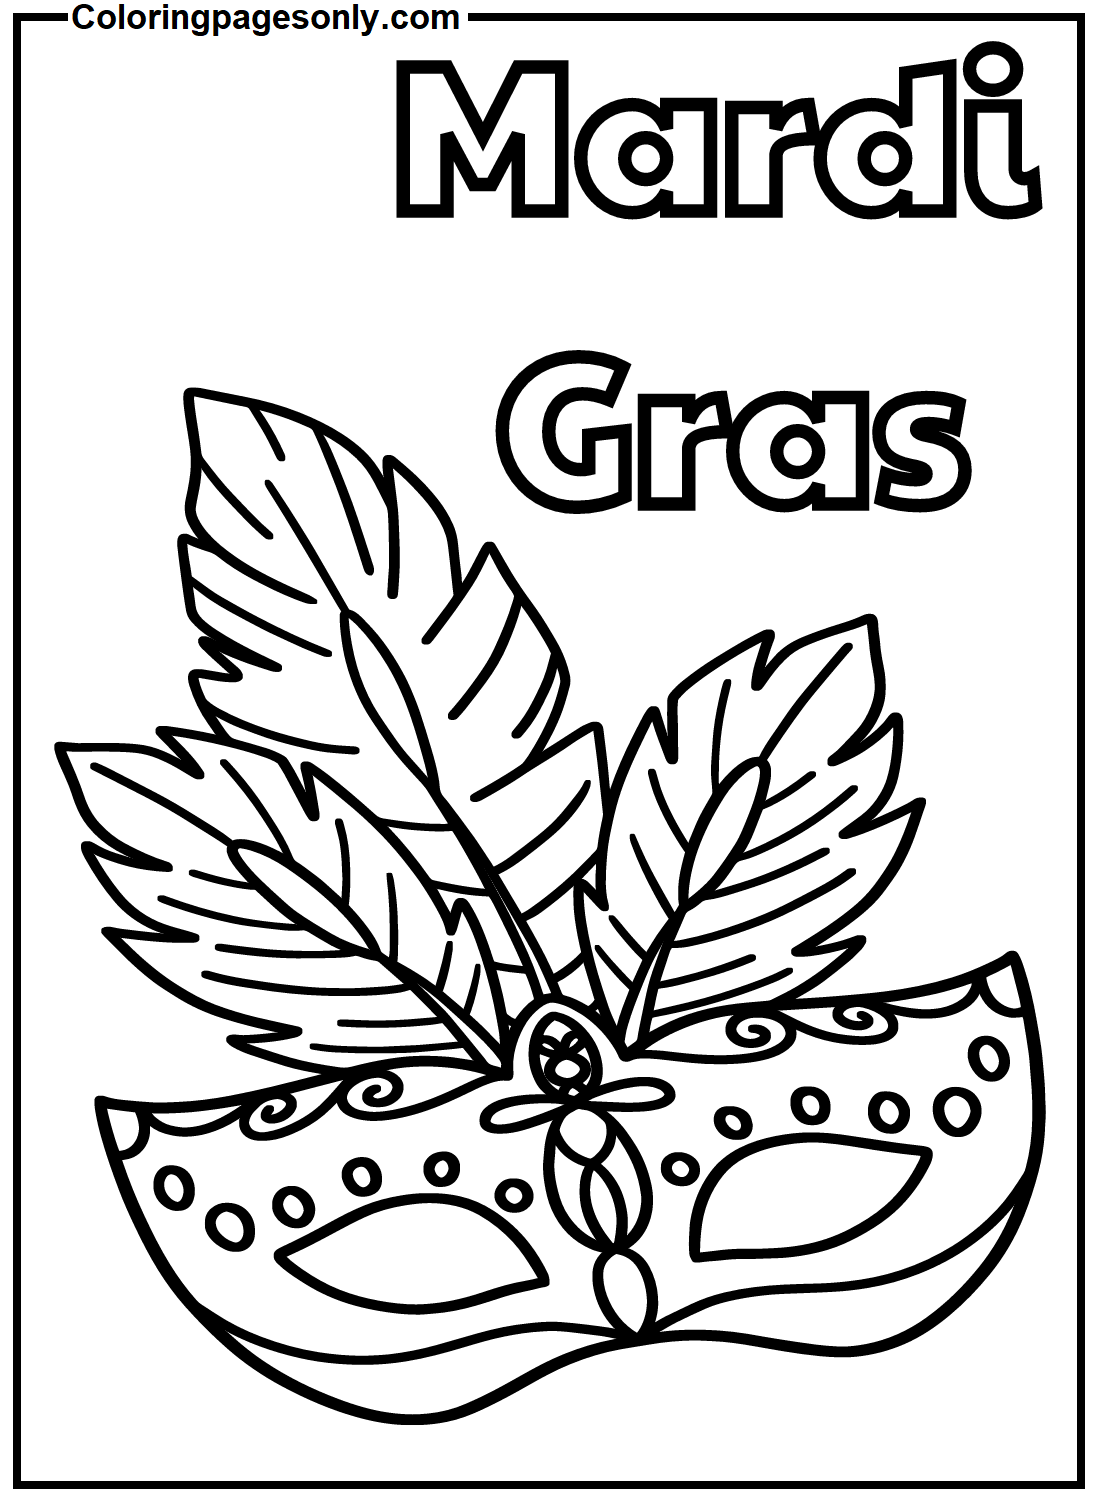 Mardi Gras With Mask Coloring Pages